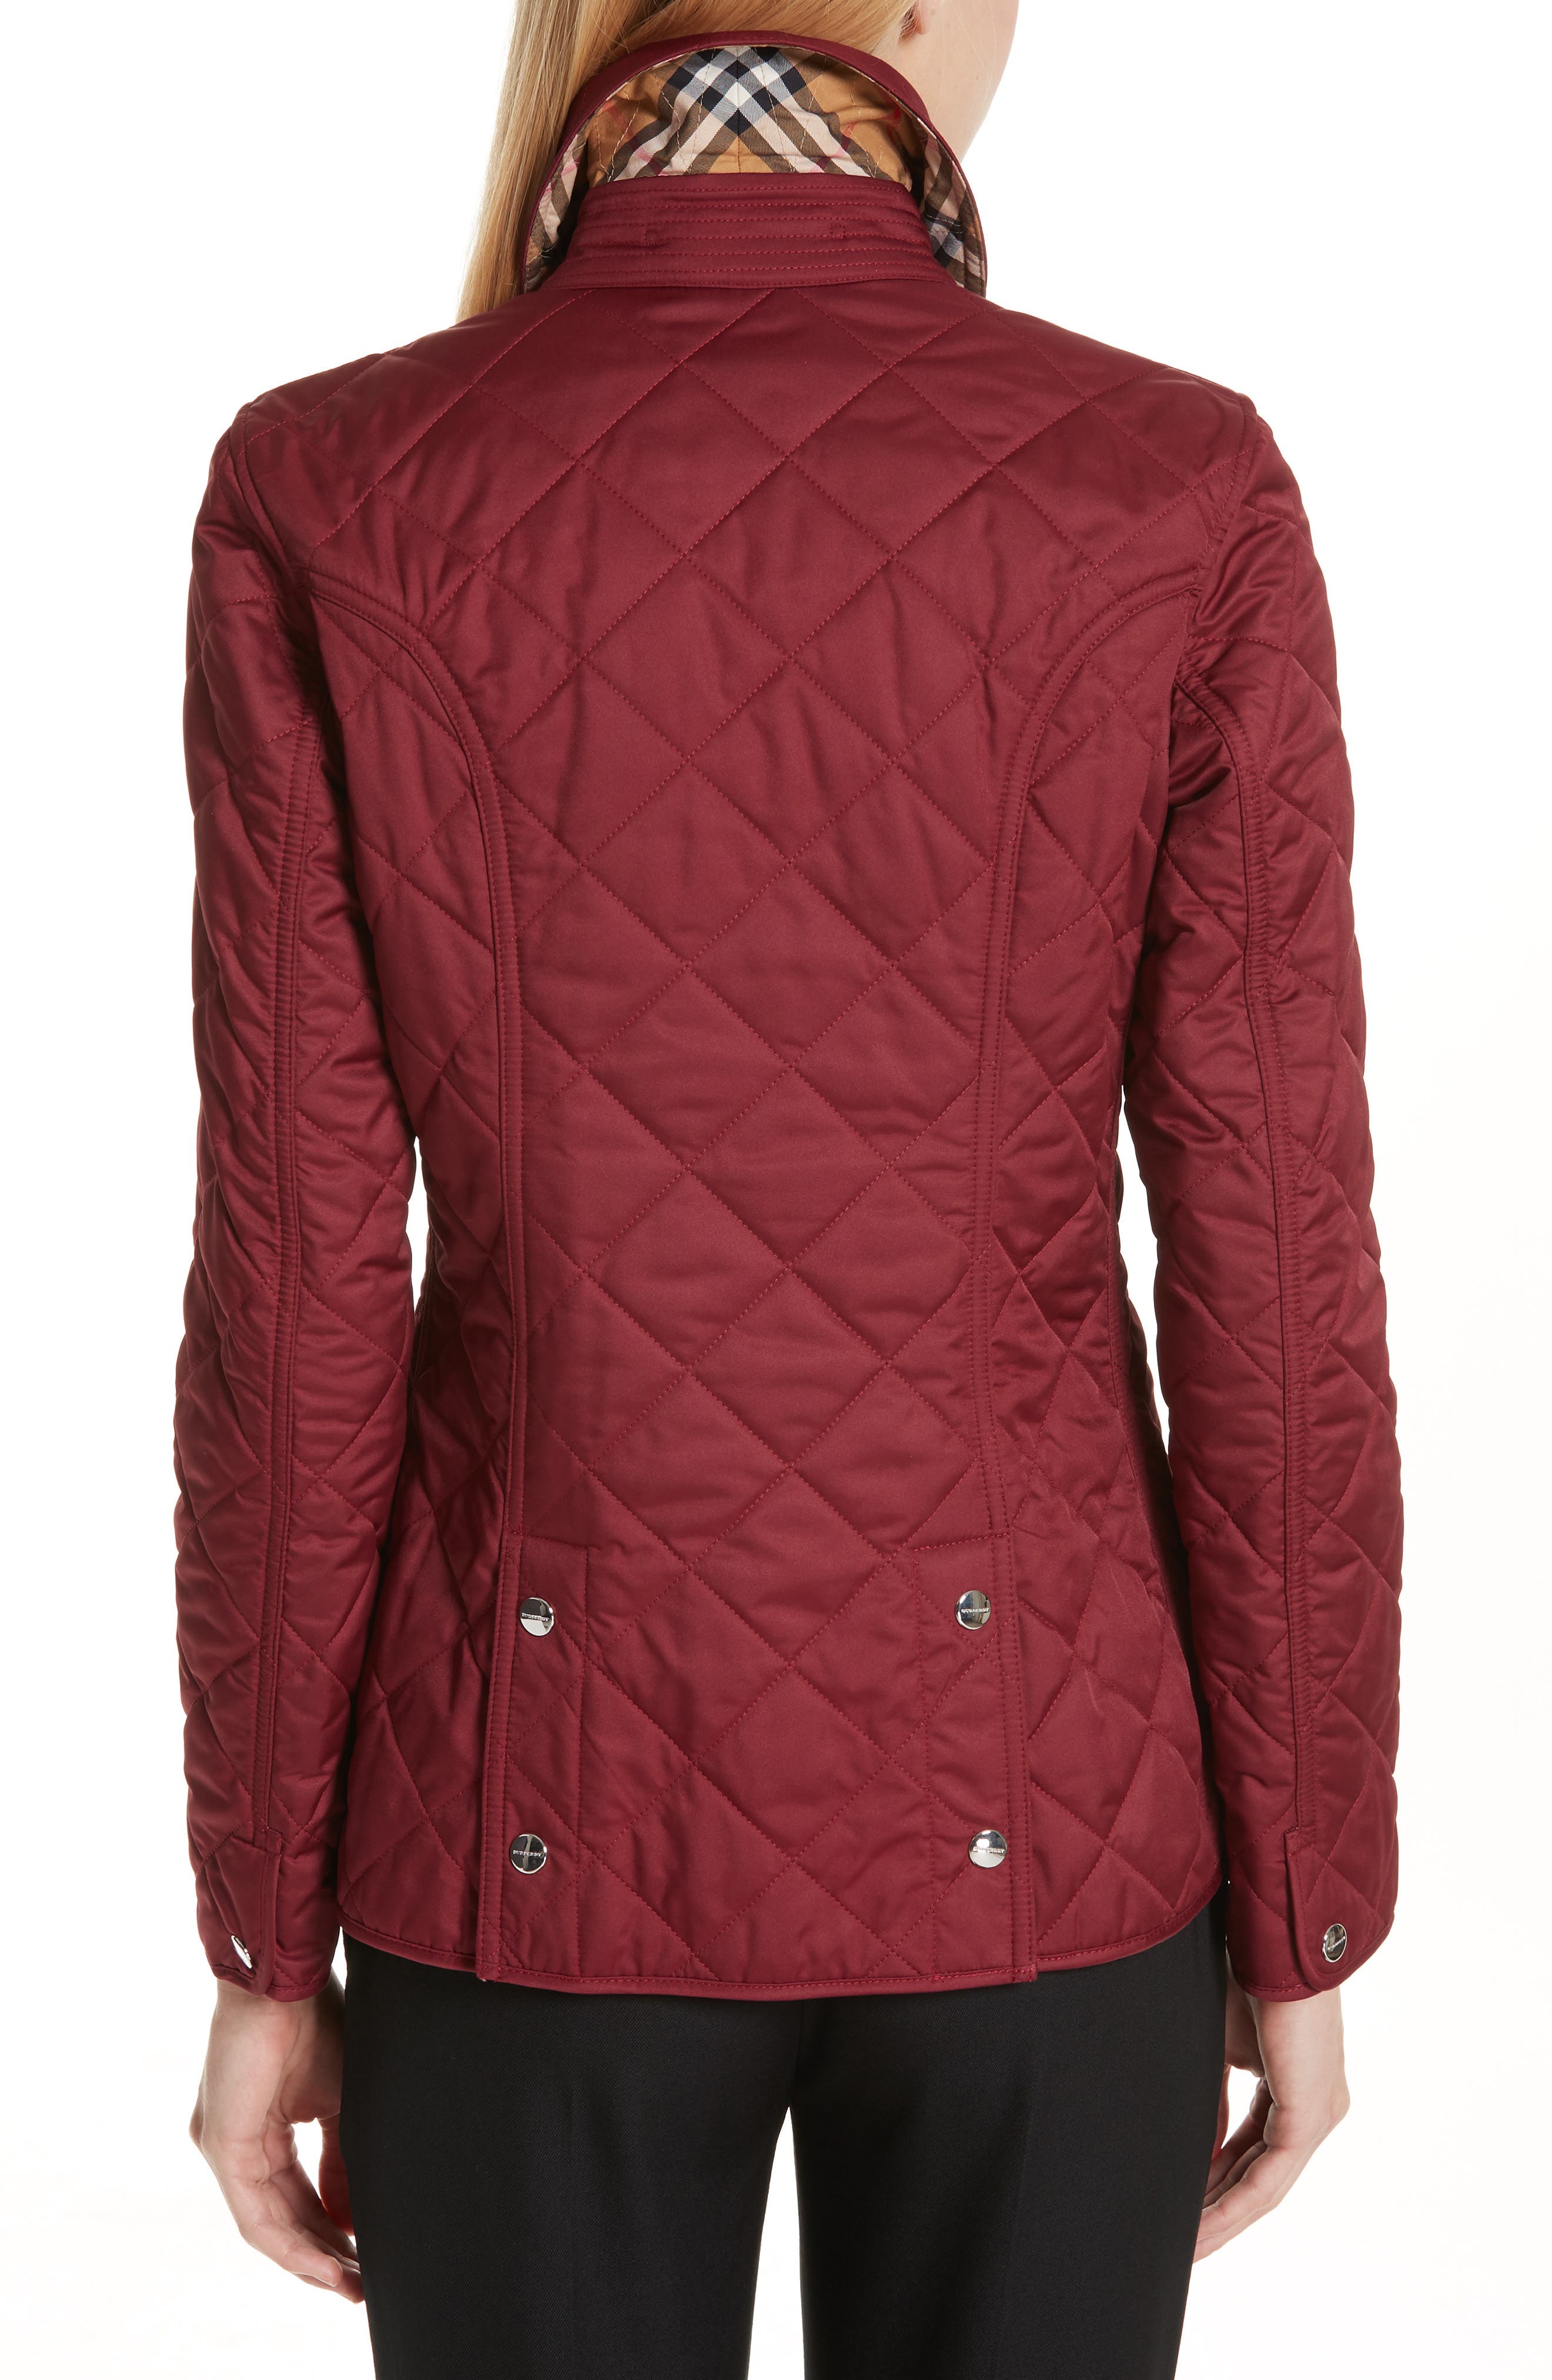 burberry embroidered crest diamond quilted jacket